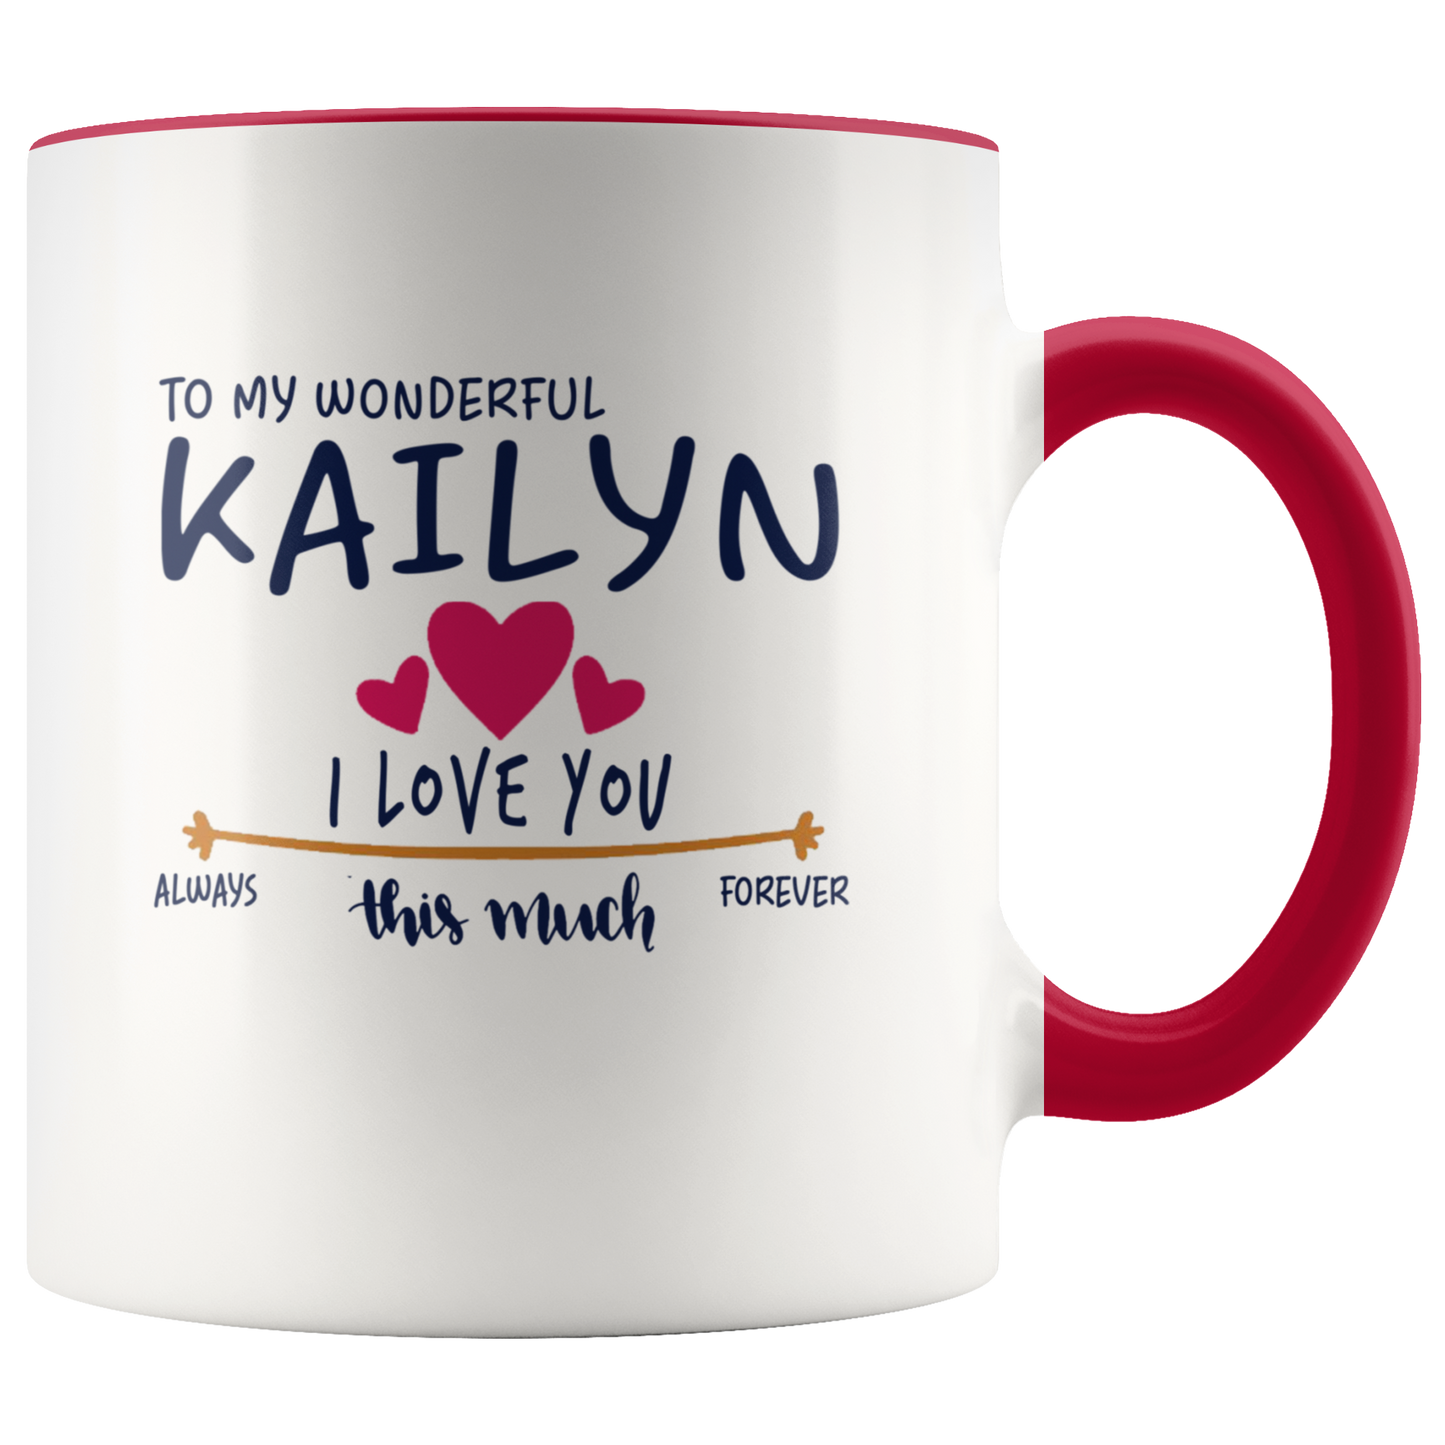 M-21260314-sp-22796 - Valentines Day Coffee Mug With Name Kailyn - To My Wonderful